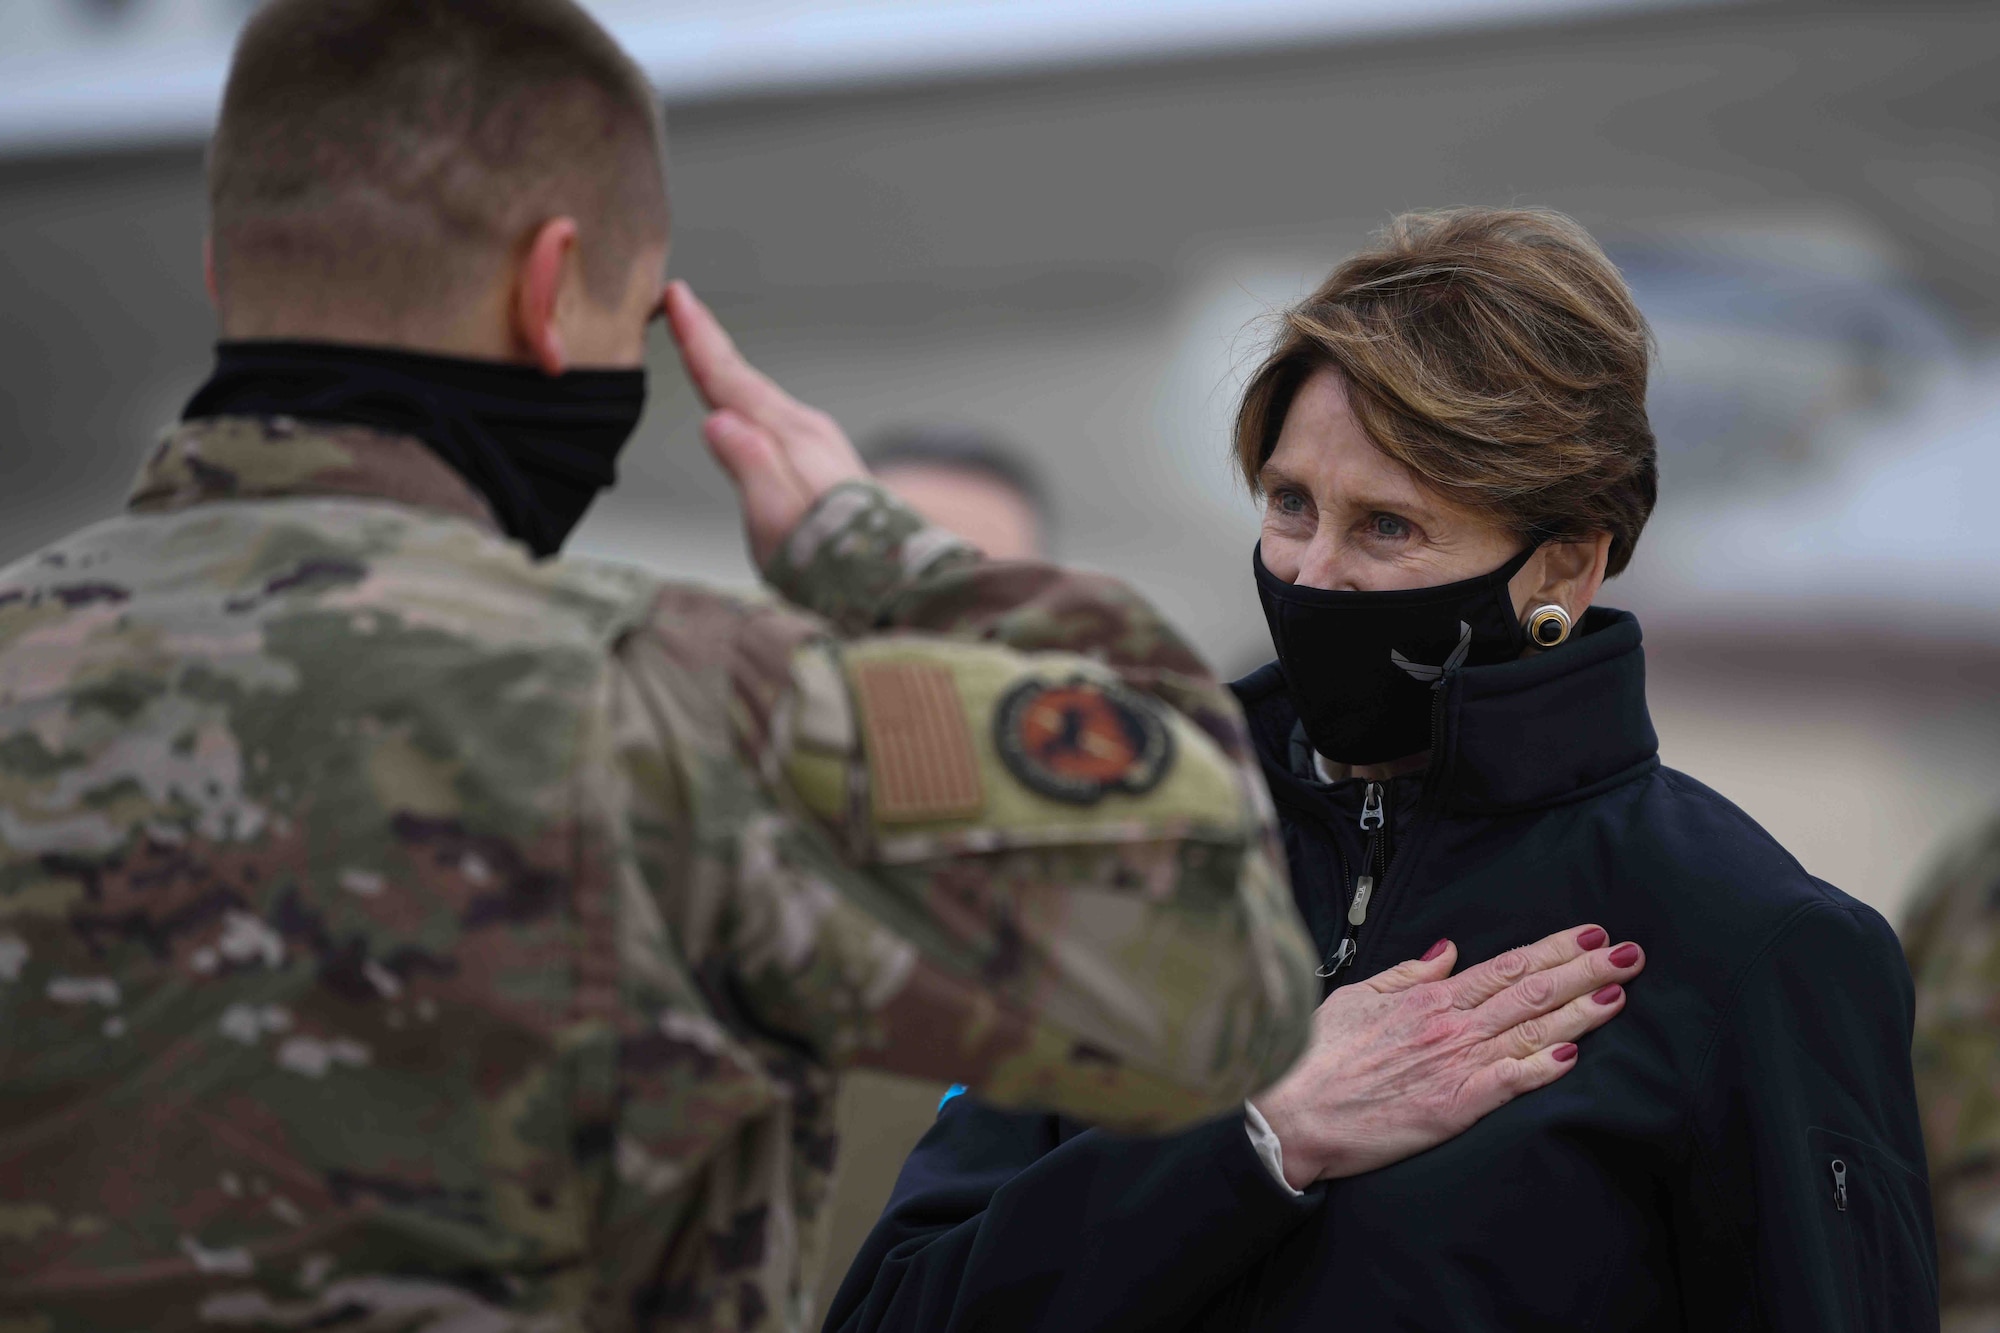 Secretary of the Air Force Barbara M. Barrett speaks to an Airman from the 31st Fighter Wing before she departs Aviano Air Base, Italy, Dec. 23, 2020. During her visit she listened to 31st FW’s mission briefs and coined multiple exceptional Airmen. (U.S. Air Force photo by Airman 1st Class Ericka A. Woolever)